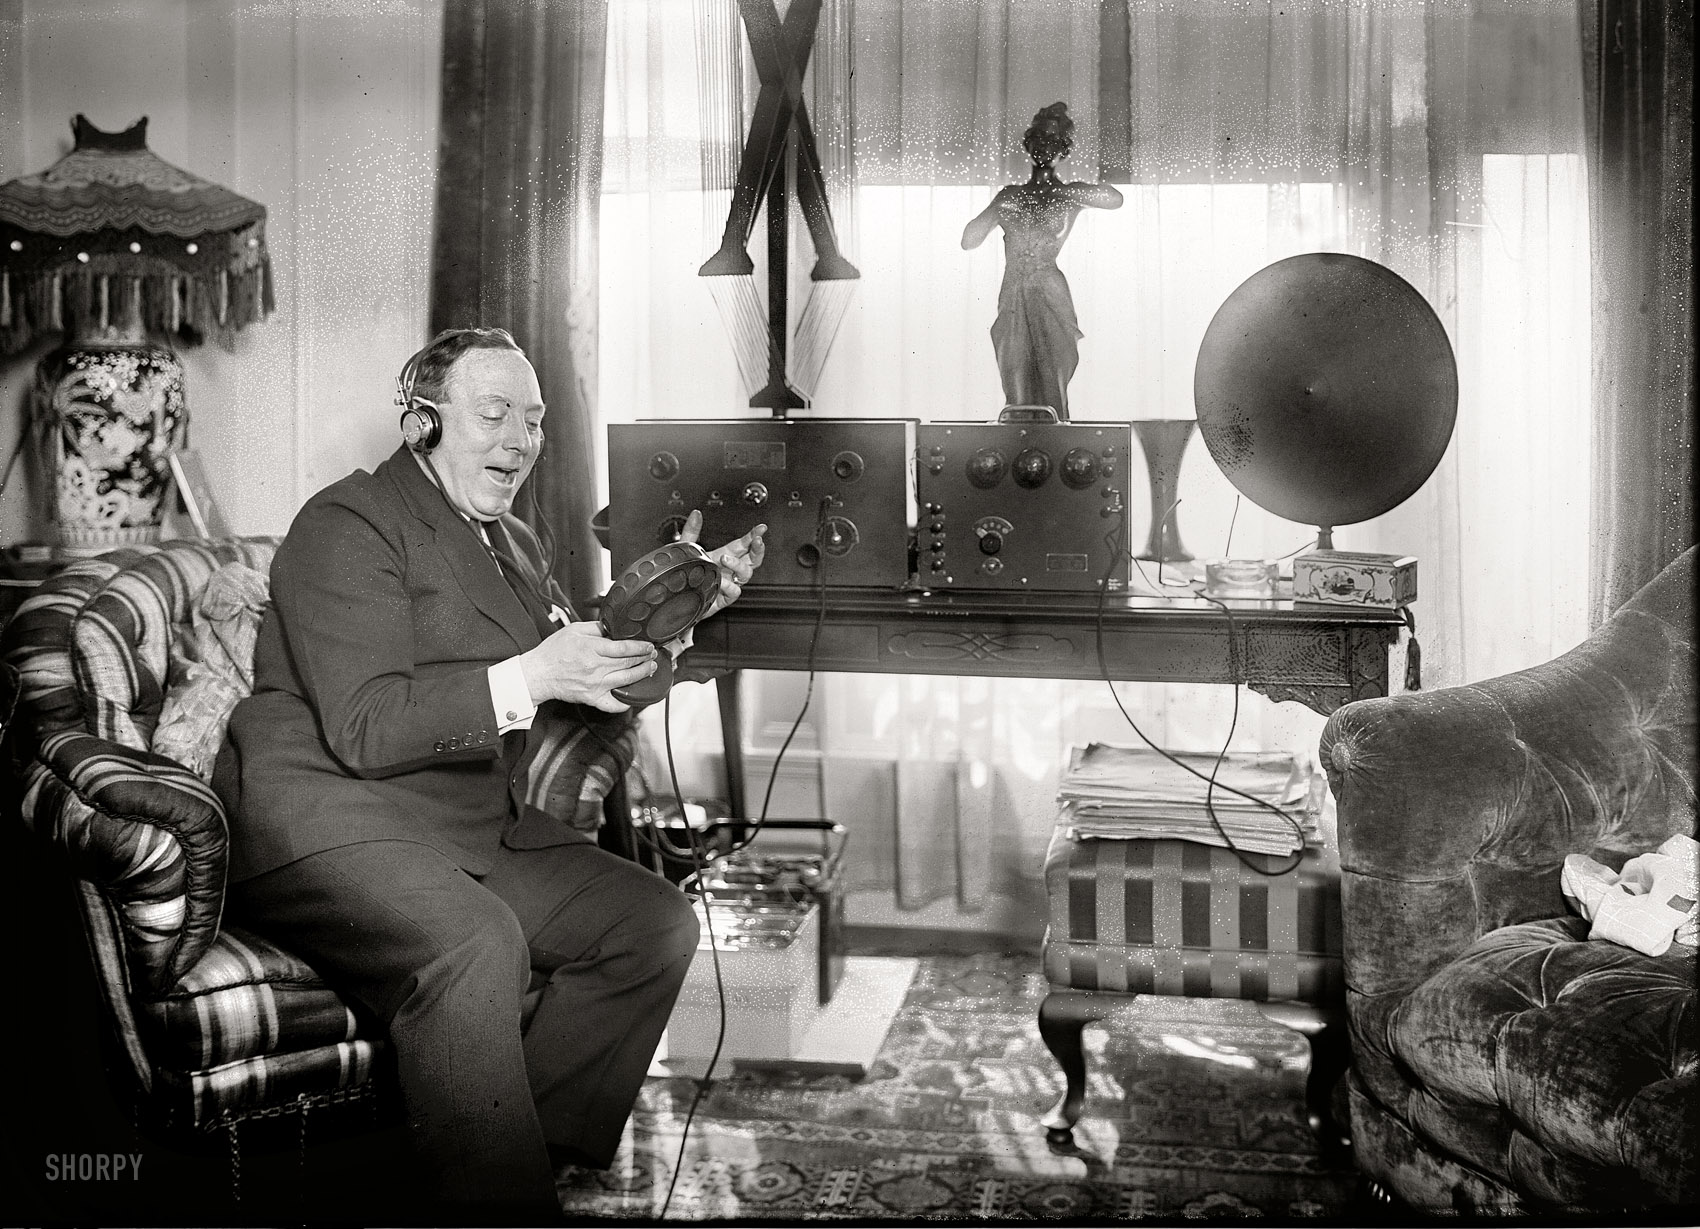 New York circa 1920s. "De Luca." The Italian baritone Giuseppe De Luca, who for many years sang leading roles for the Metropolitan Opera. And who seems to be working from home. 5x7 glass negative, Bain News Service. View full size.